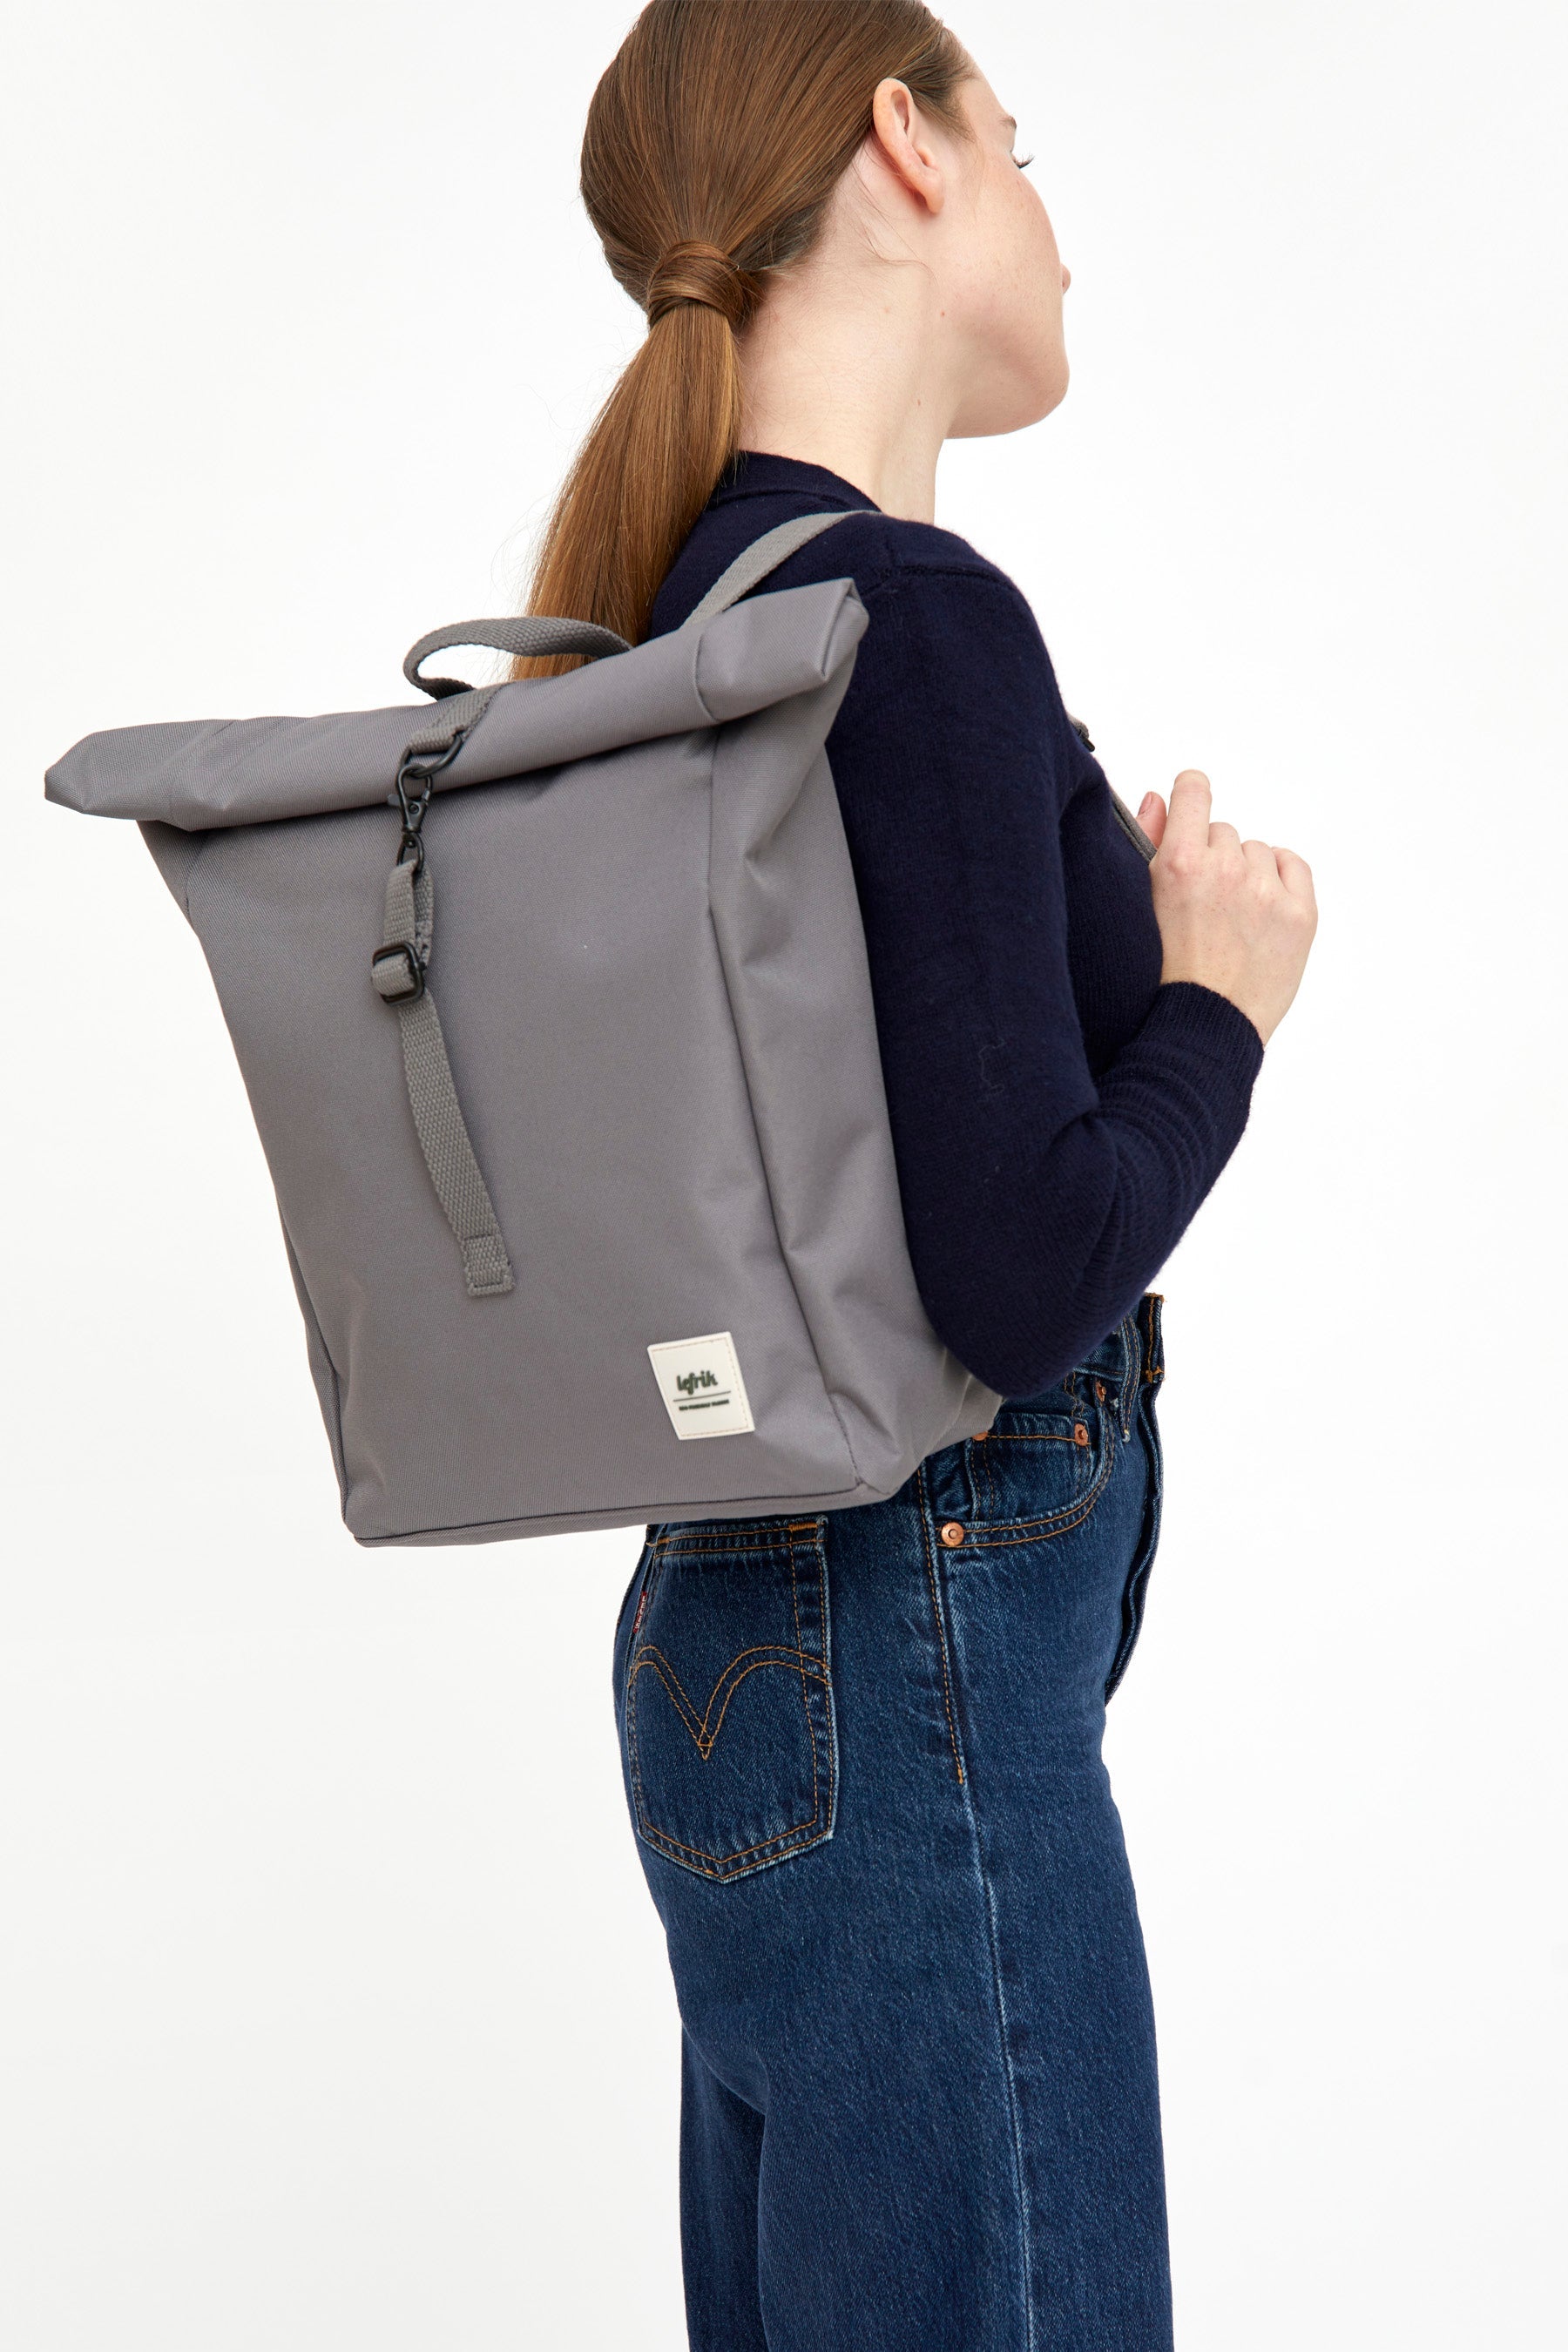 Gray Roll Mini backpack (12l) made from recycled PET plastic bottles from Lefrik